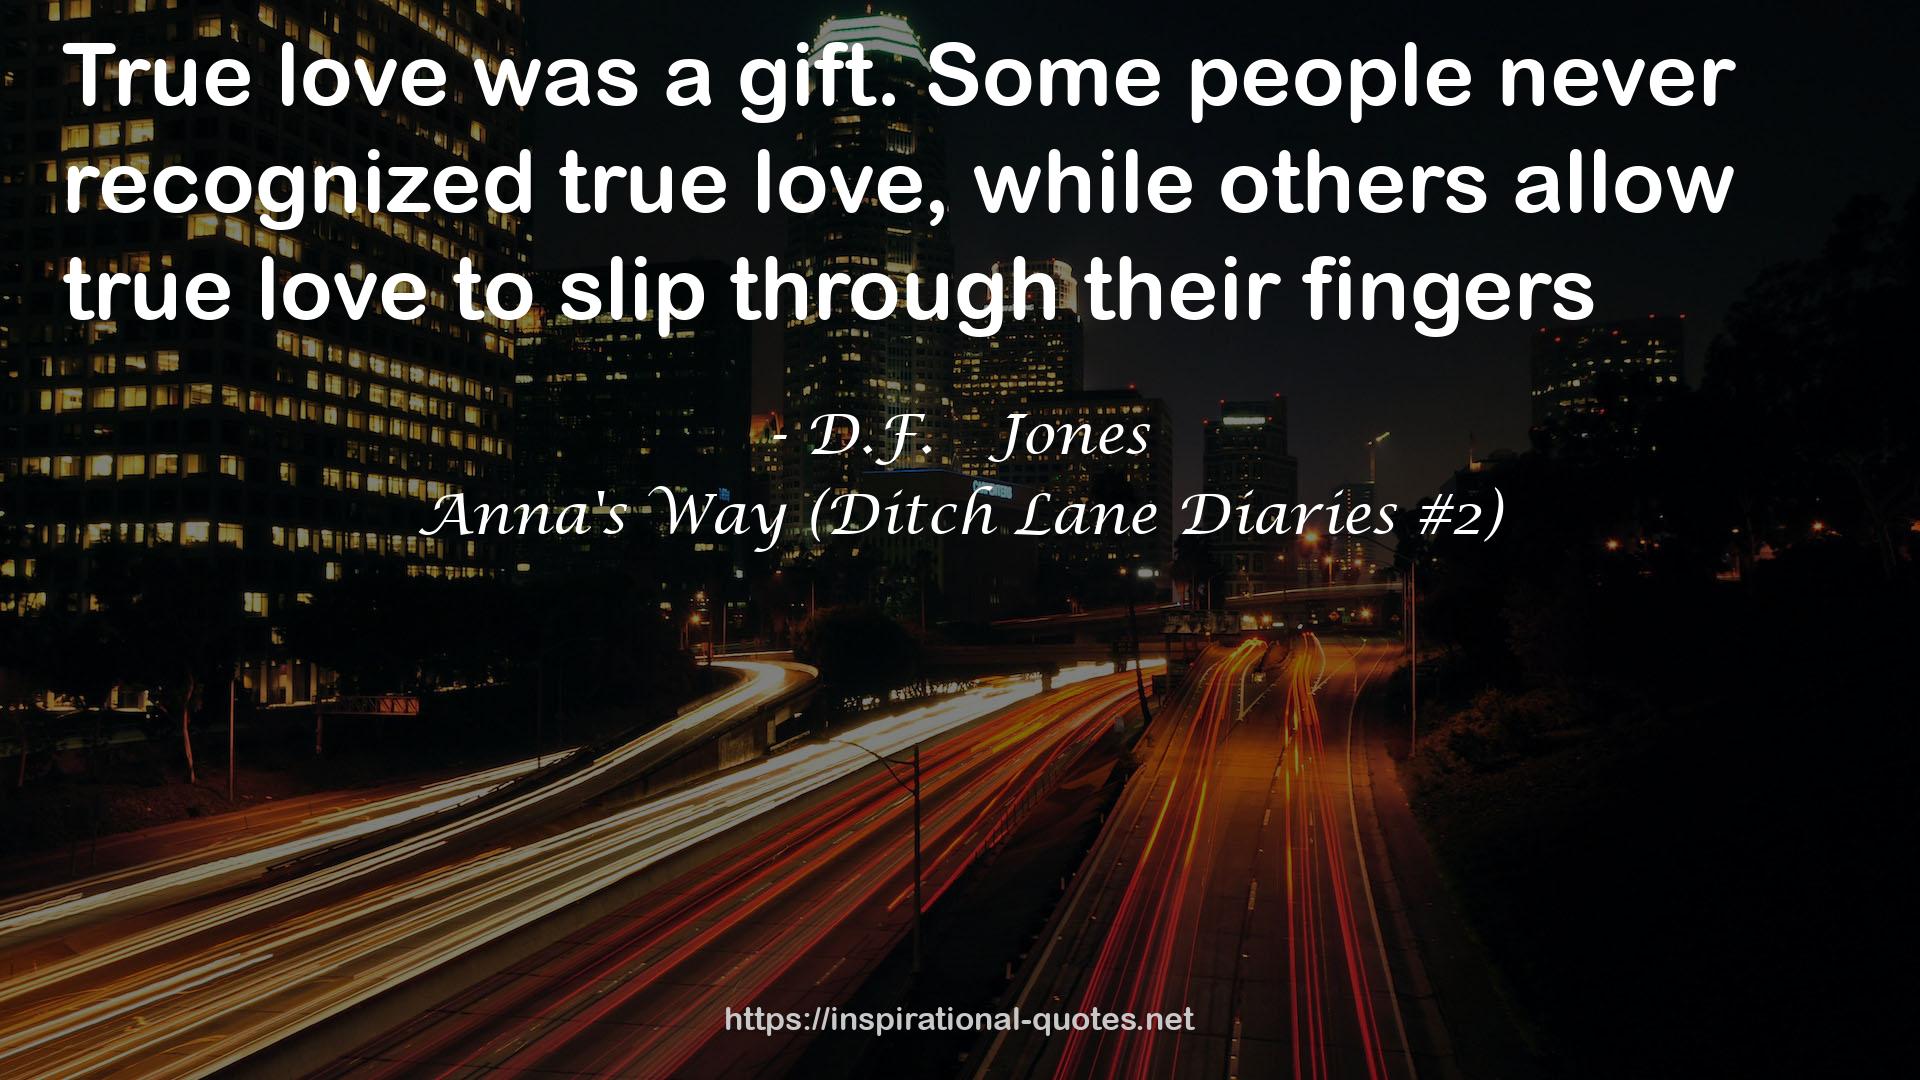 Anna's Way (Ditch Lane Diaries #2) QUOTES